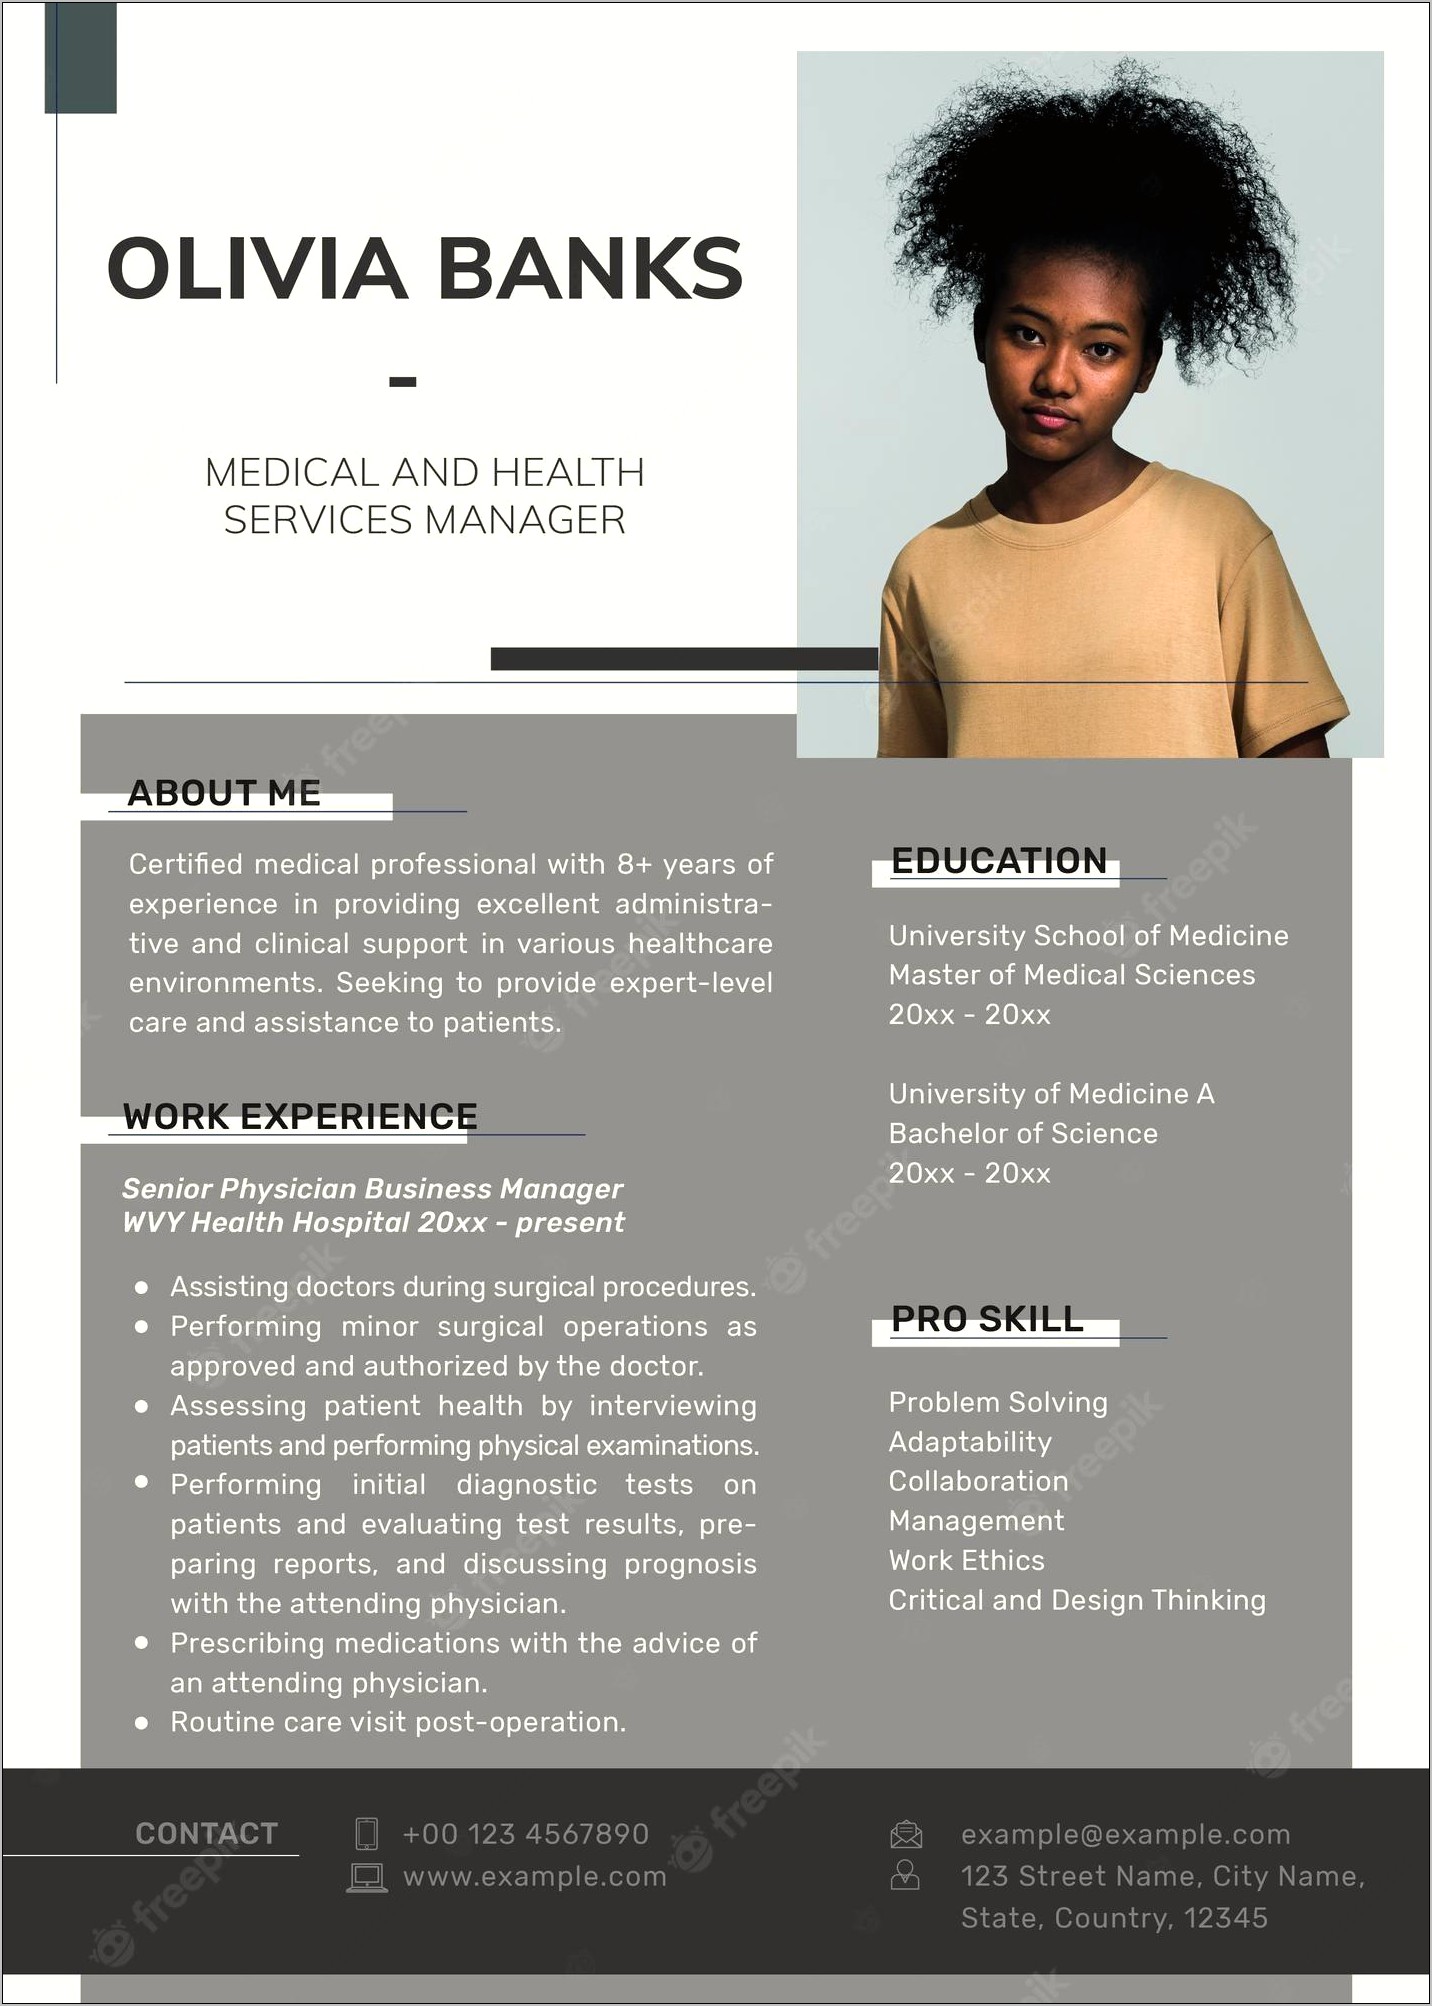 Free Resume Assistance Near Me